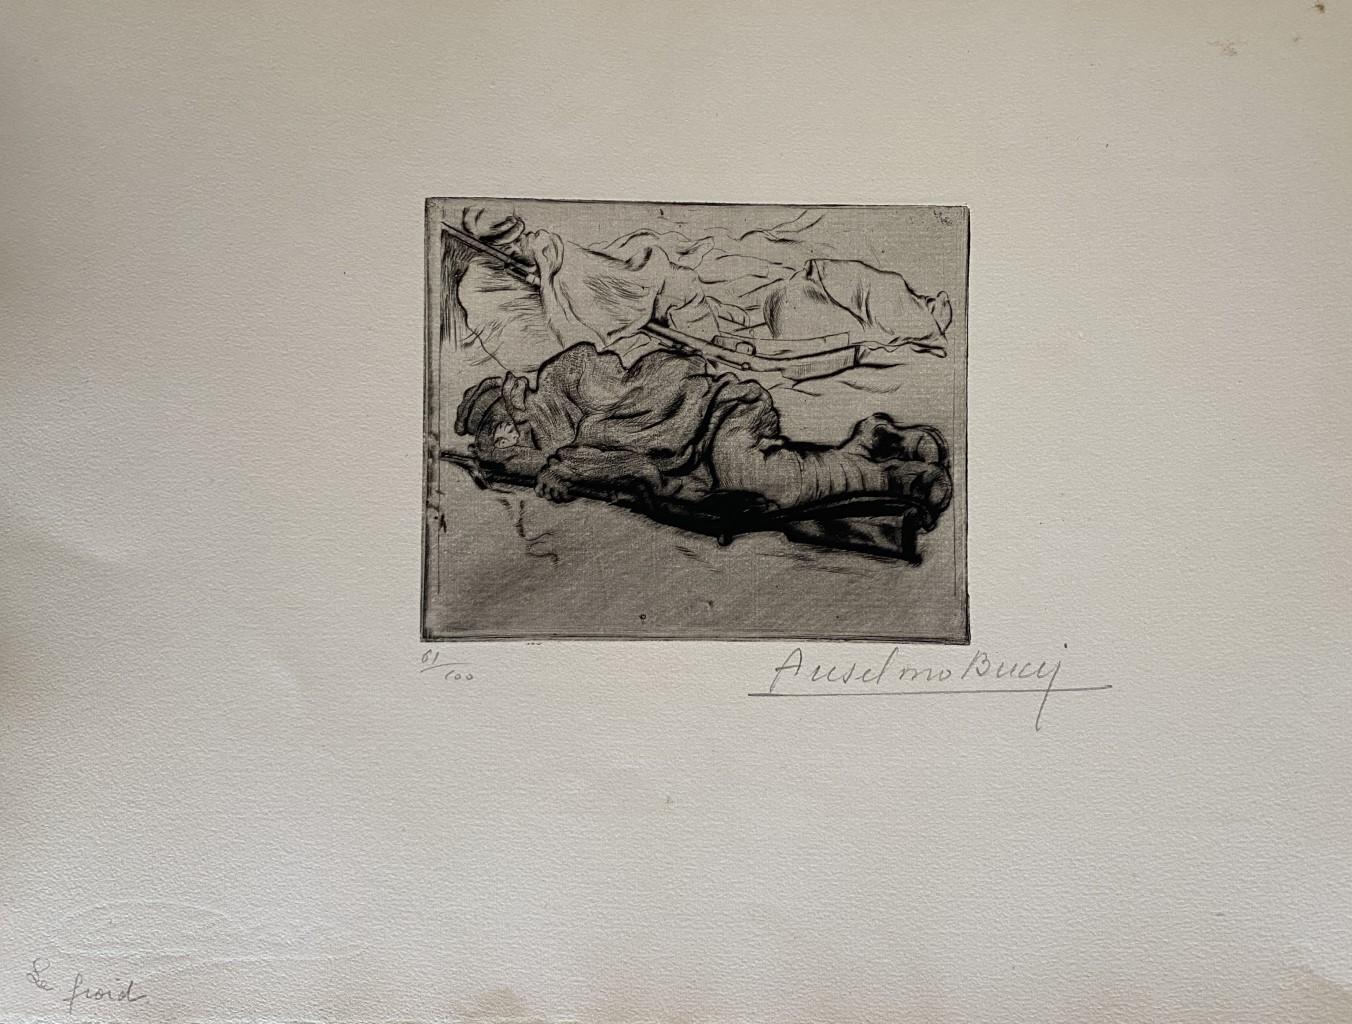 "Military" 1917 is a beautiful print in etching technique, realized by Anselmo Bucci (1887-1955).

Hand signed. Numbered 61/100 of prints on the lower left. On the lower left corner, an iscription written in pencil, Le Froidi.

Image Dimensions: 11